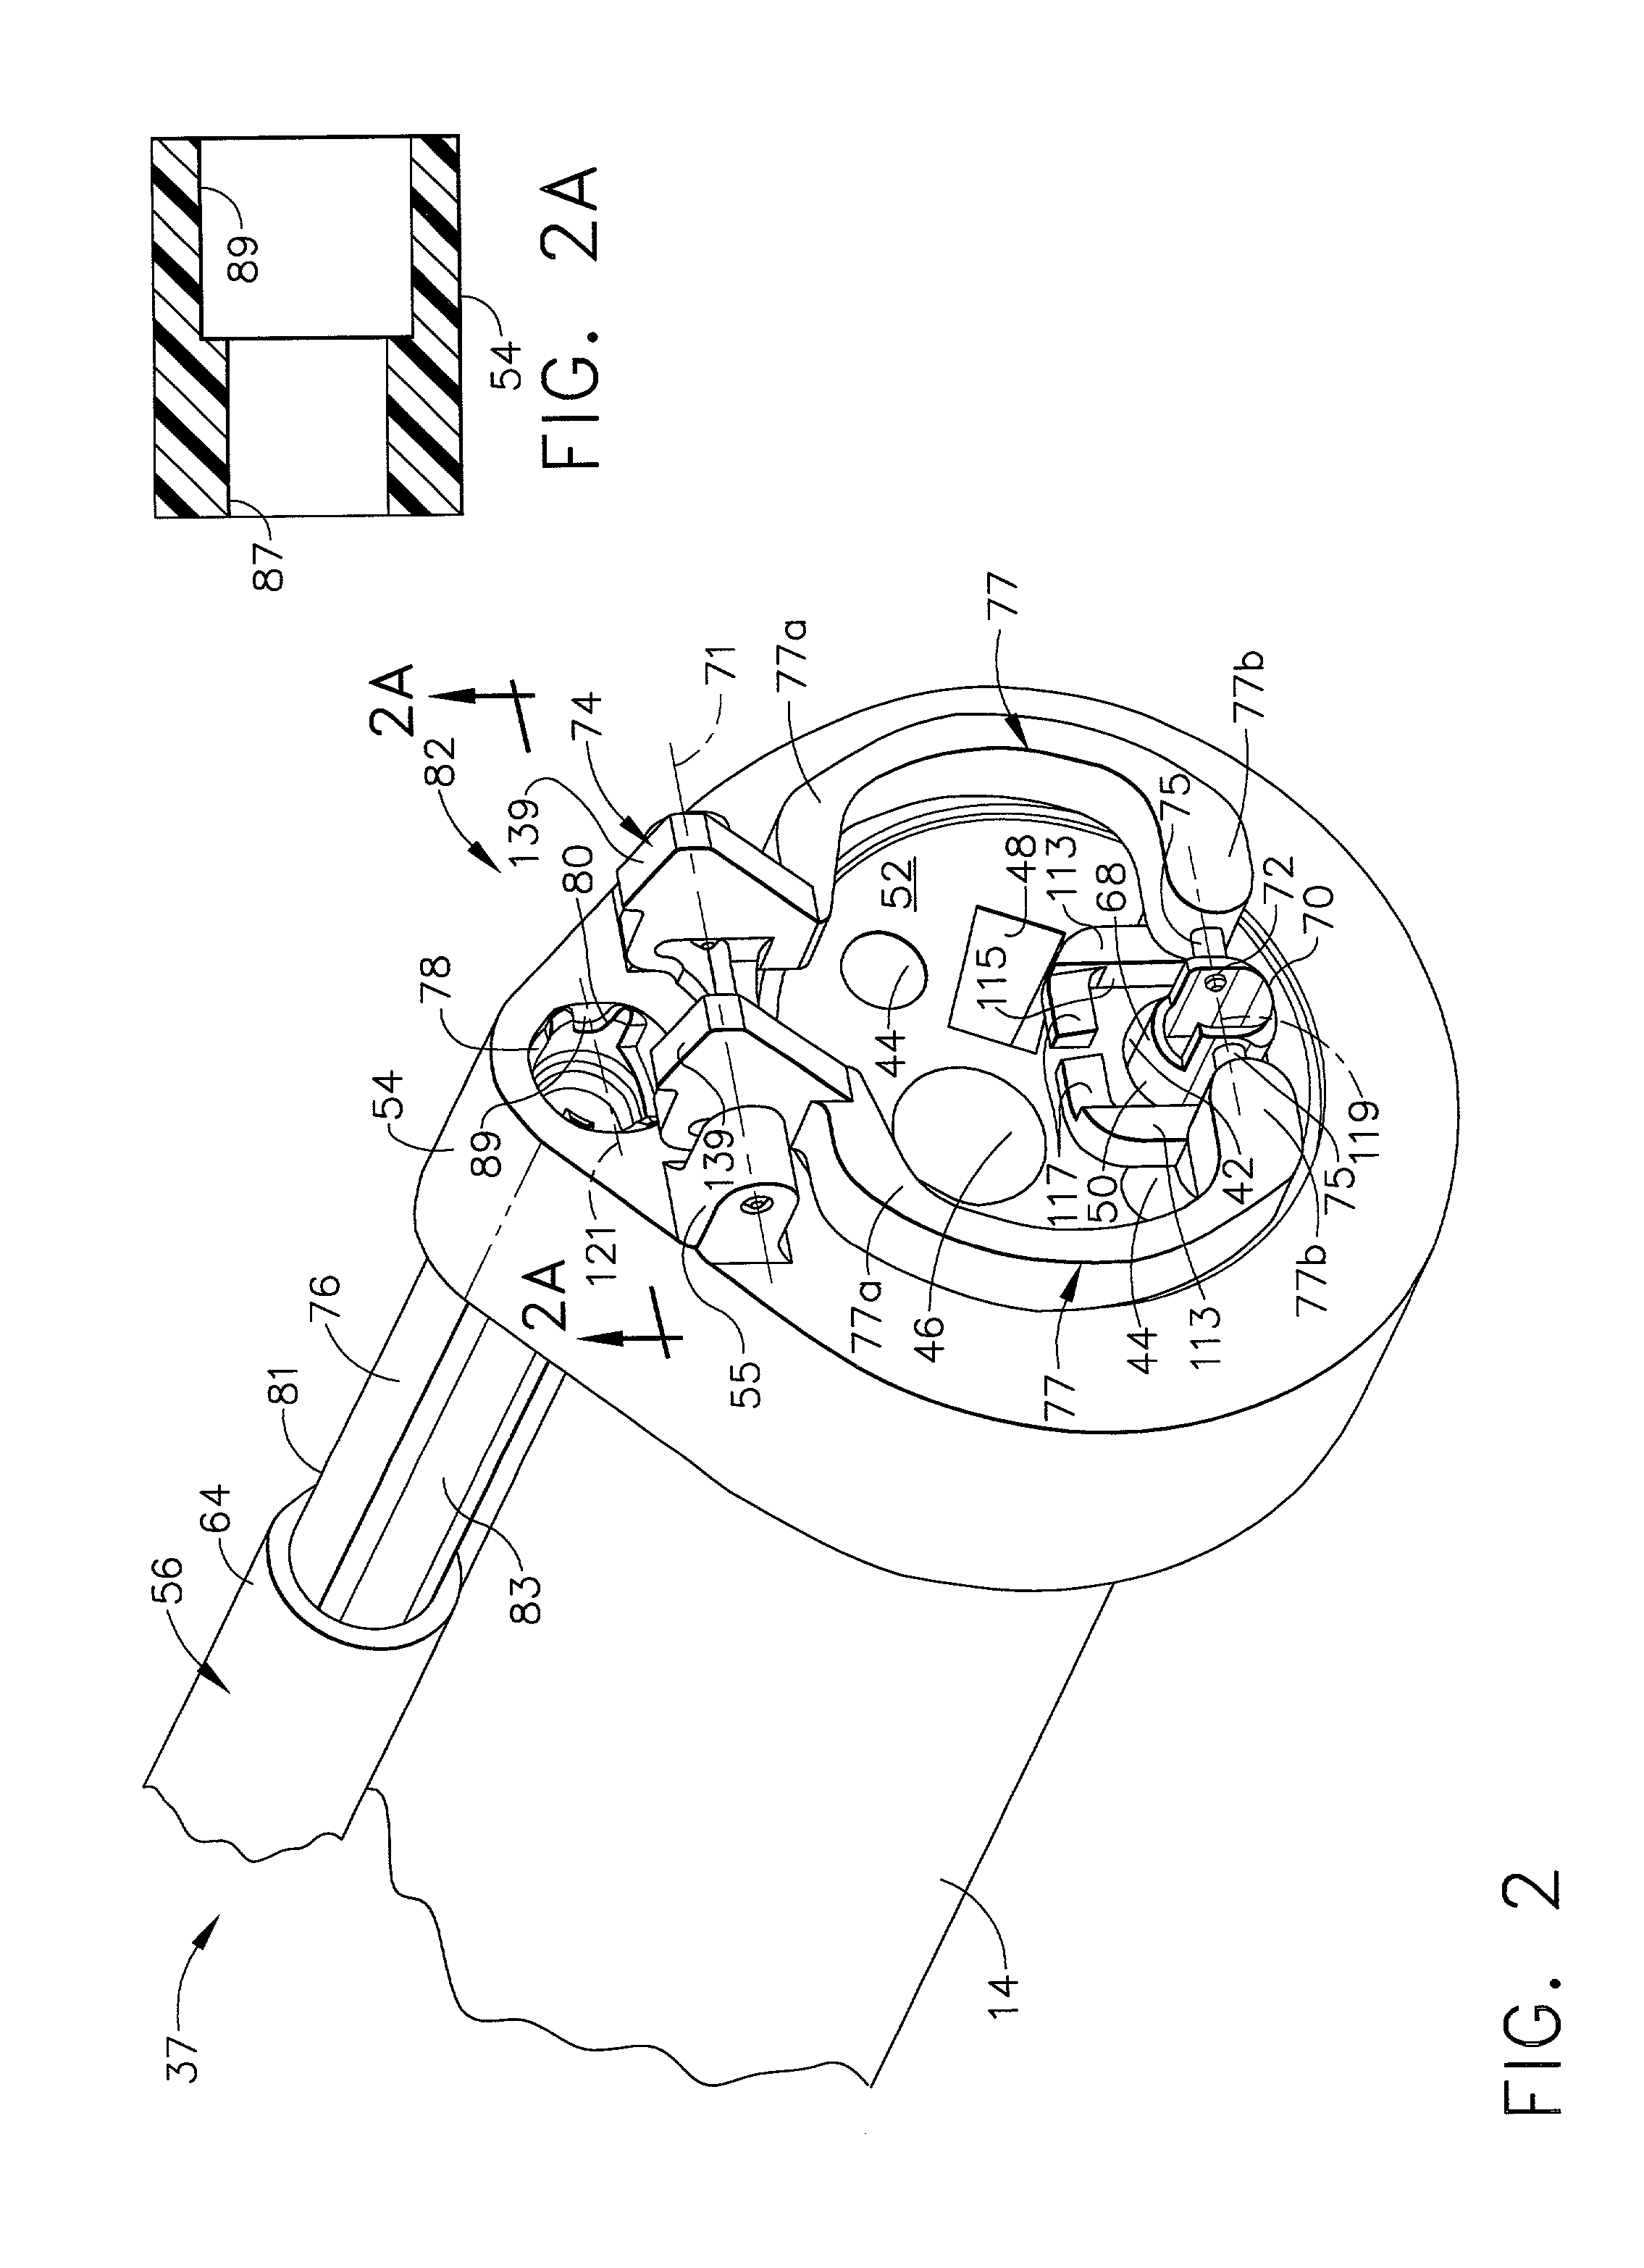 Apparatus for guiding an instrument used with an endoscope